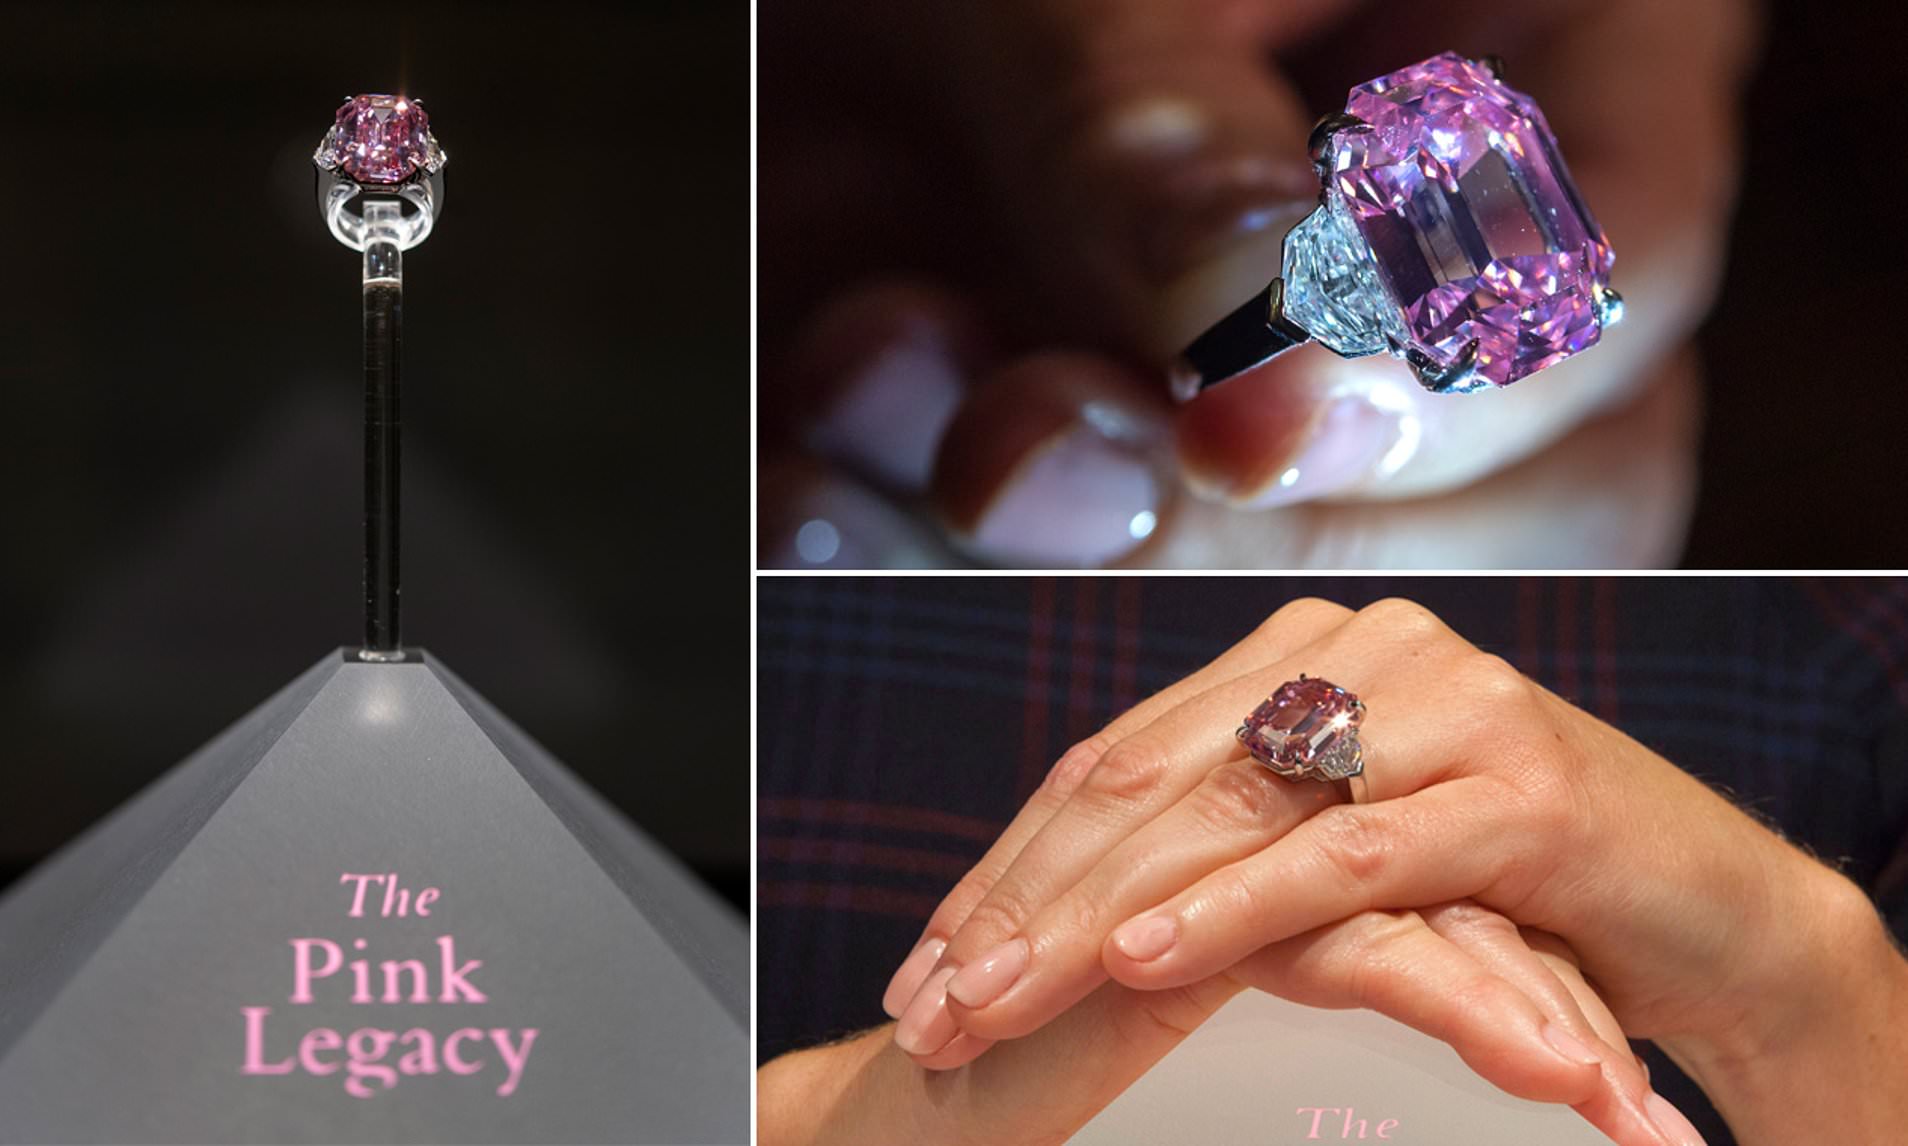 The Pink Legacy diamond in its exquisite display at Christie's auction